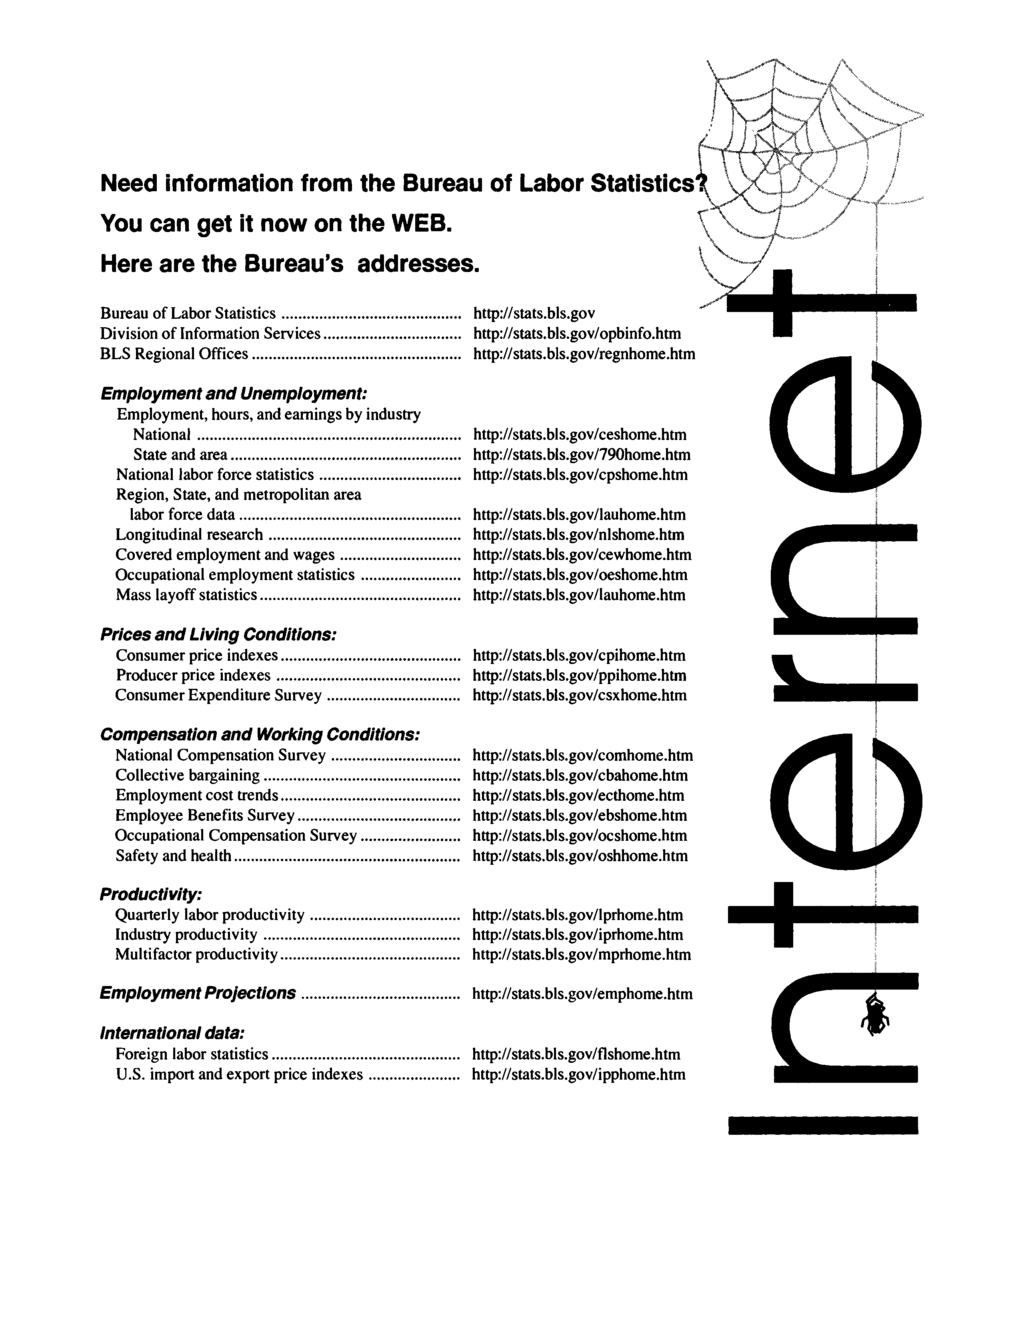 Need information from the Bureau of Labor Statistics You can get it now on the WEB. Here are the Bureau's addresses.